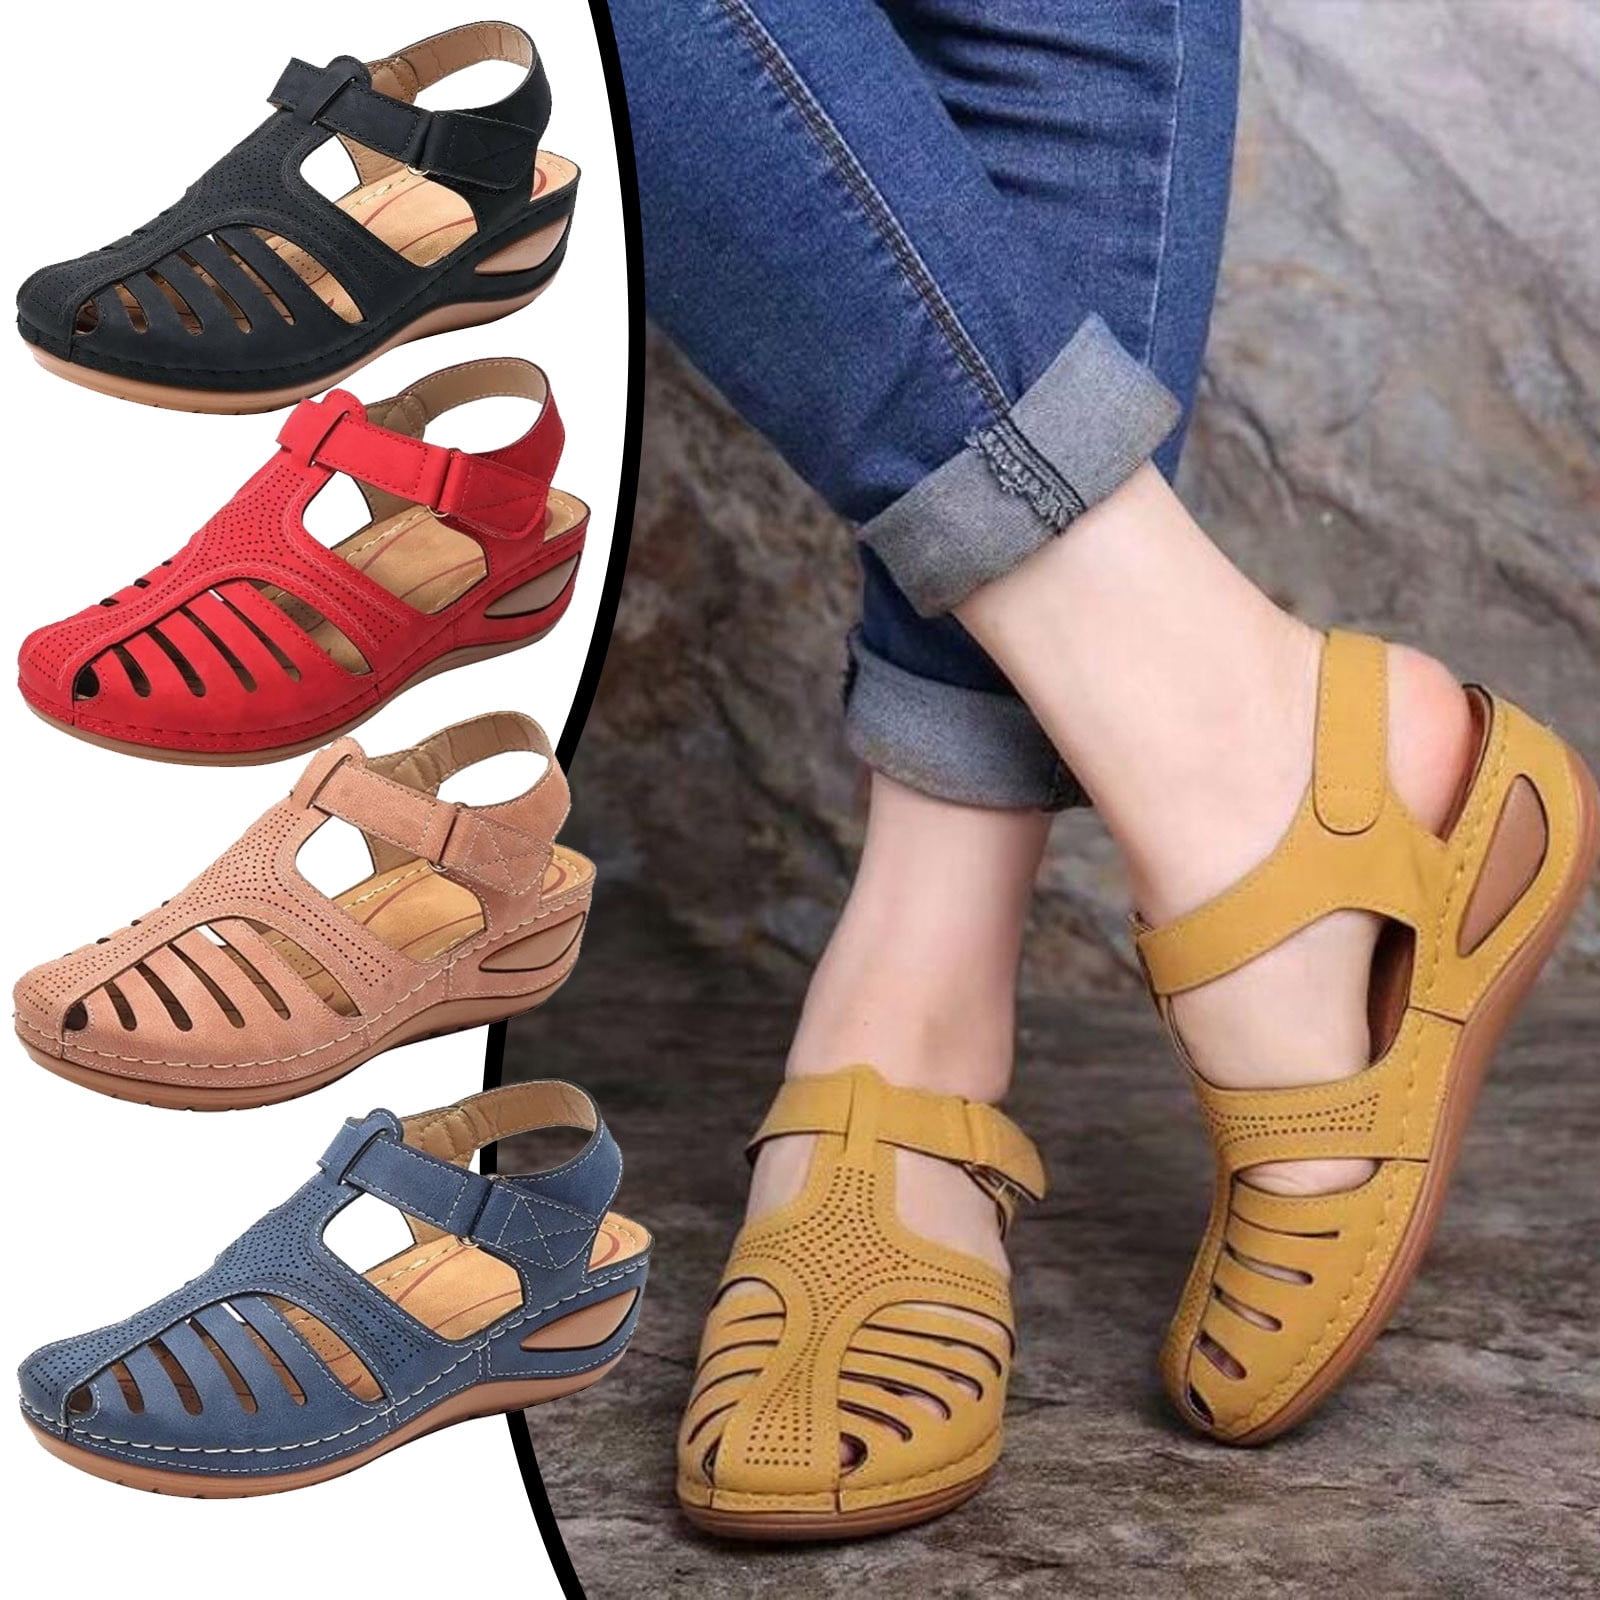 Women Casual Flats Hollow Out Slip On Closed Toe Sandals Summer Beach Shoes Comfortable Non-Slip Slippers